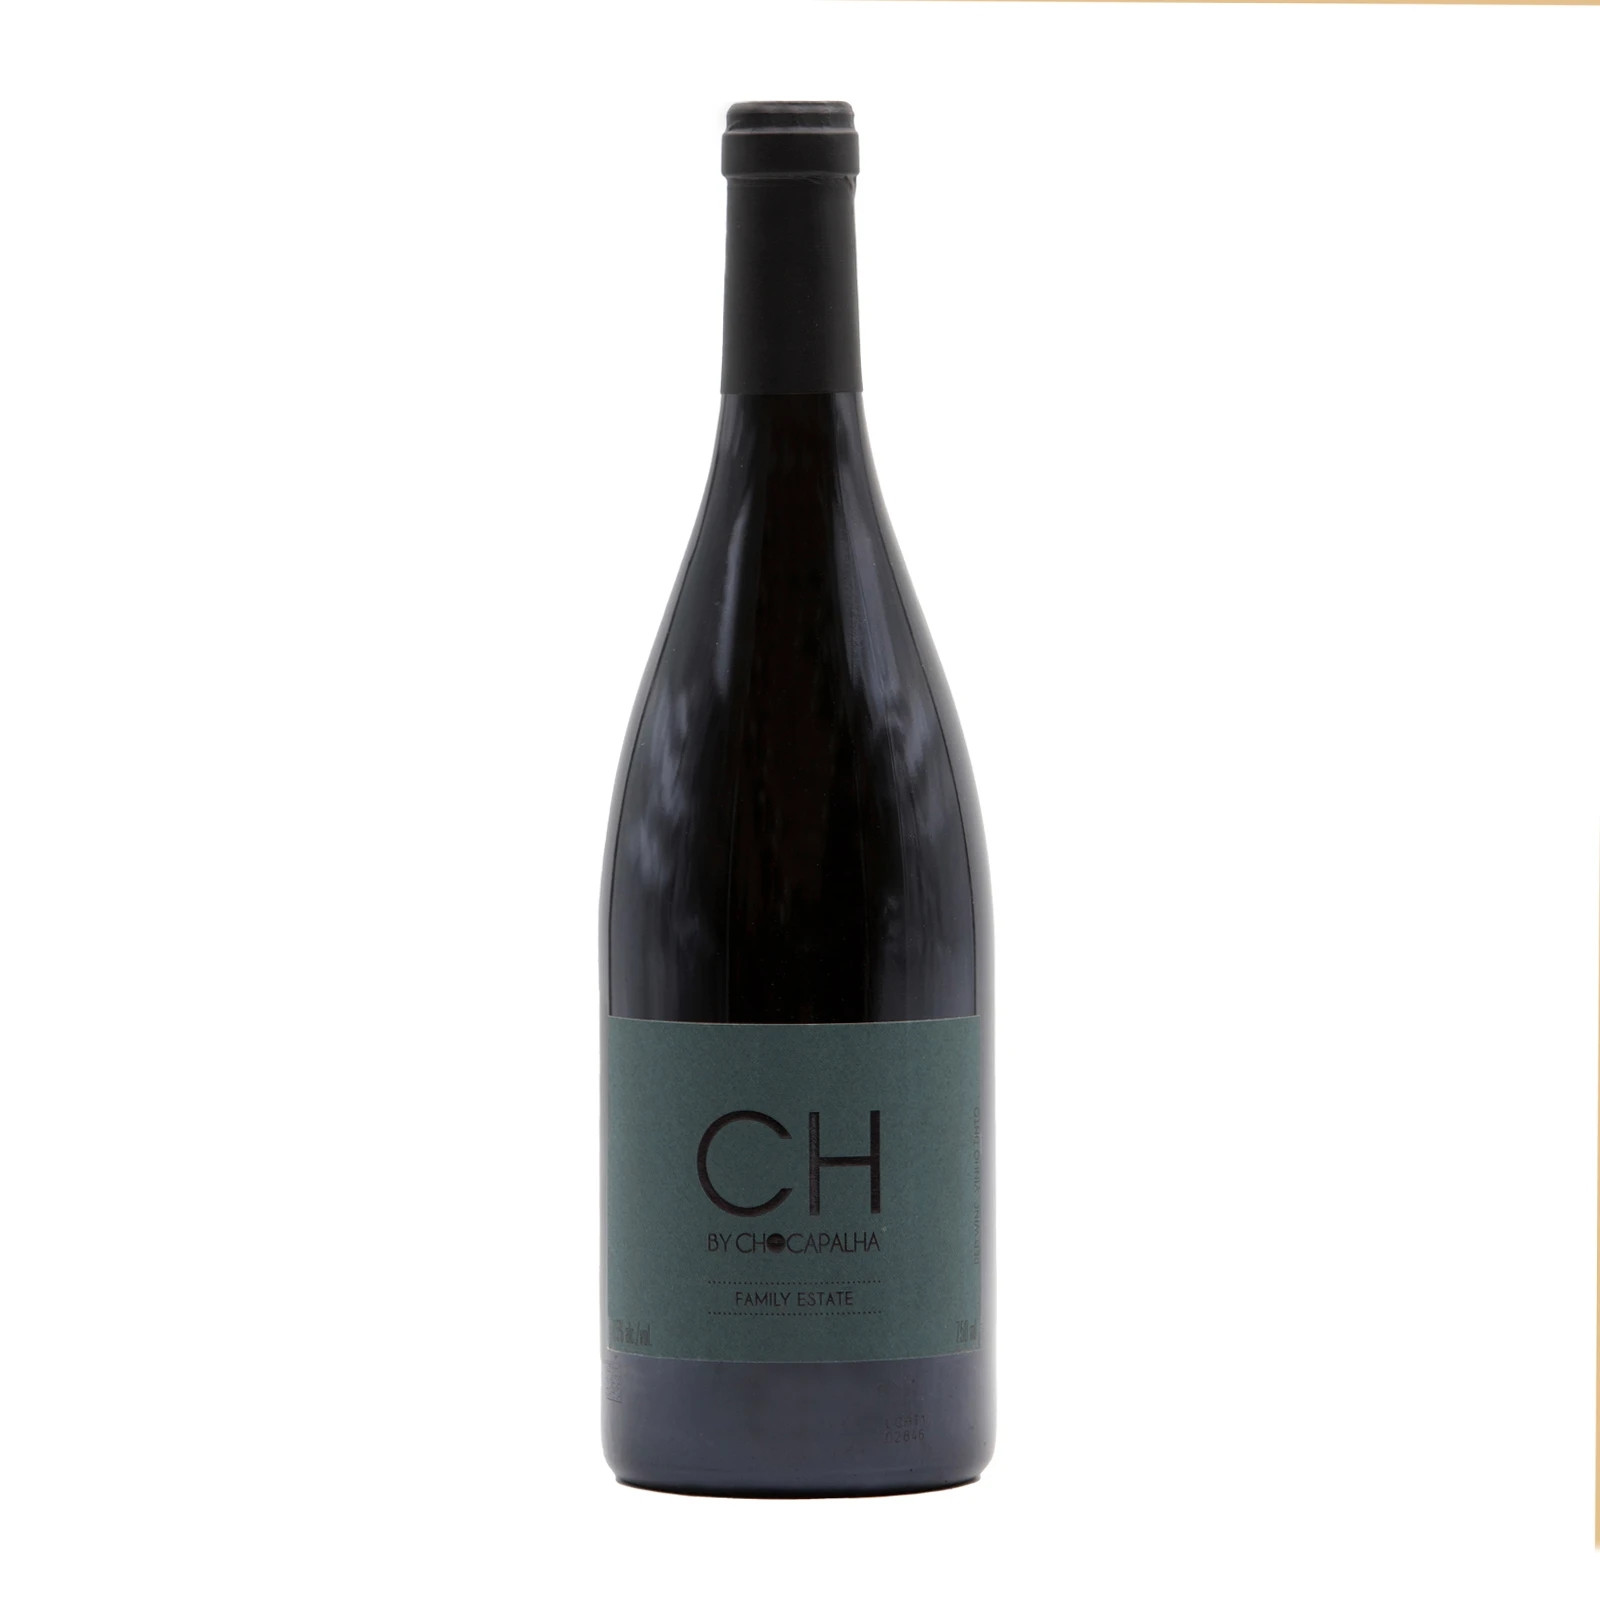 Ch By Chocapalha Rouge 2019